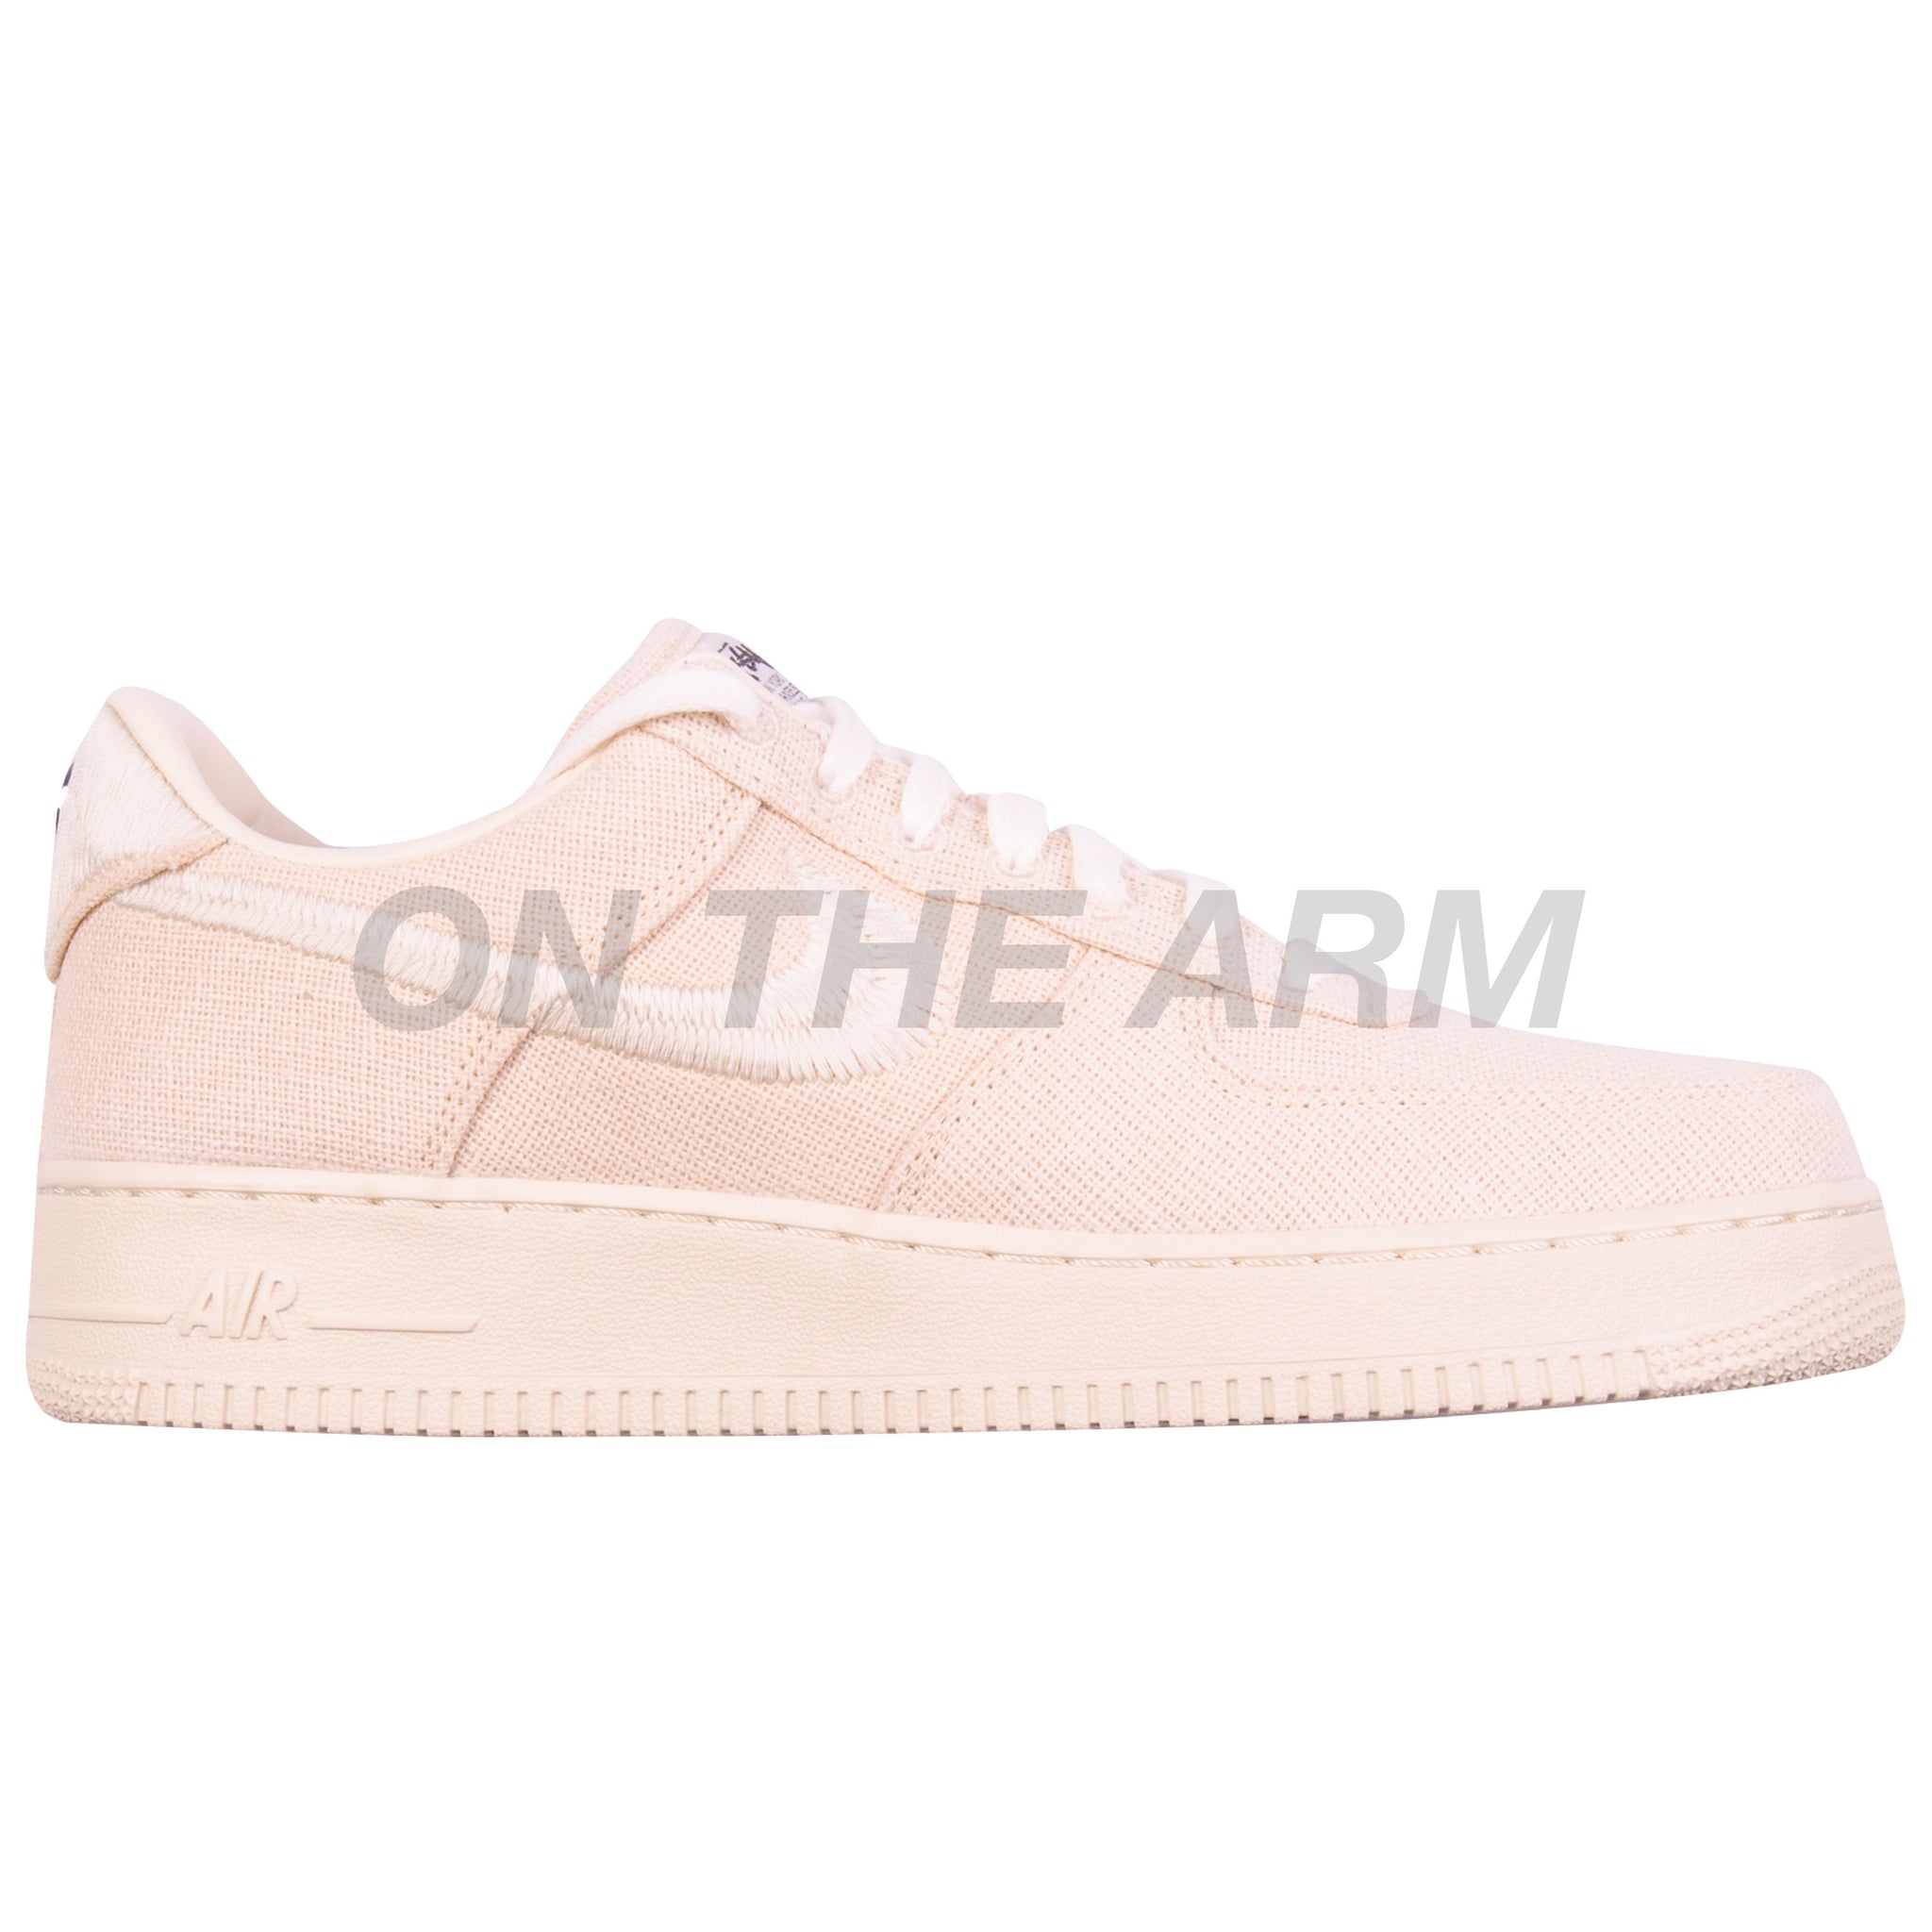 Nike Fossil Stussy Air Force 1 Low